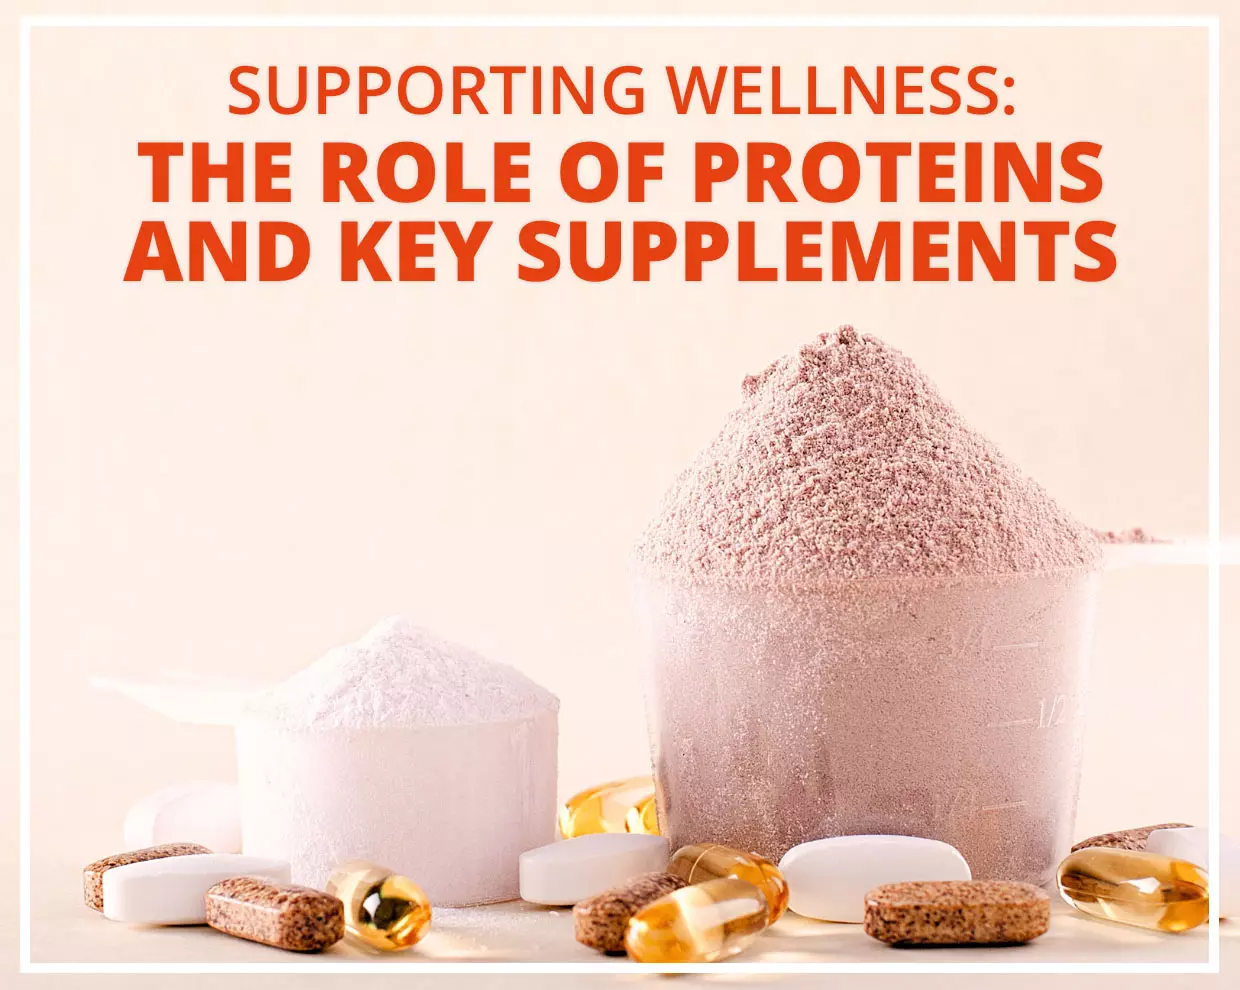 The Role of Proteins and Key Supplements